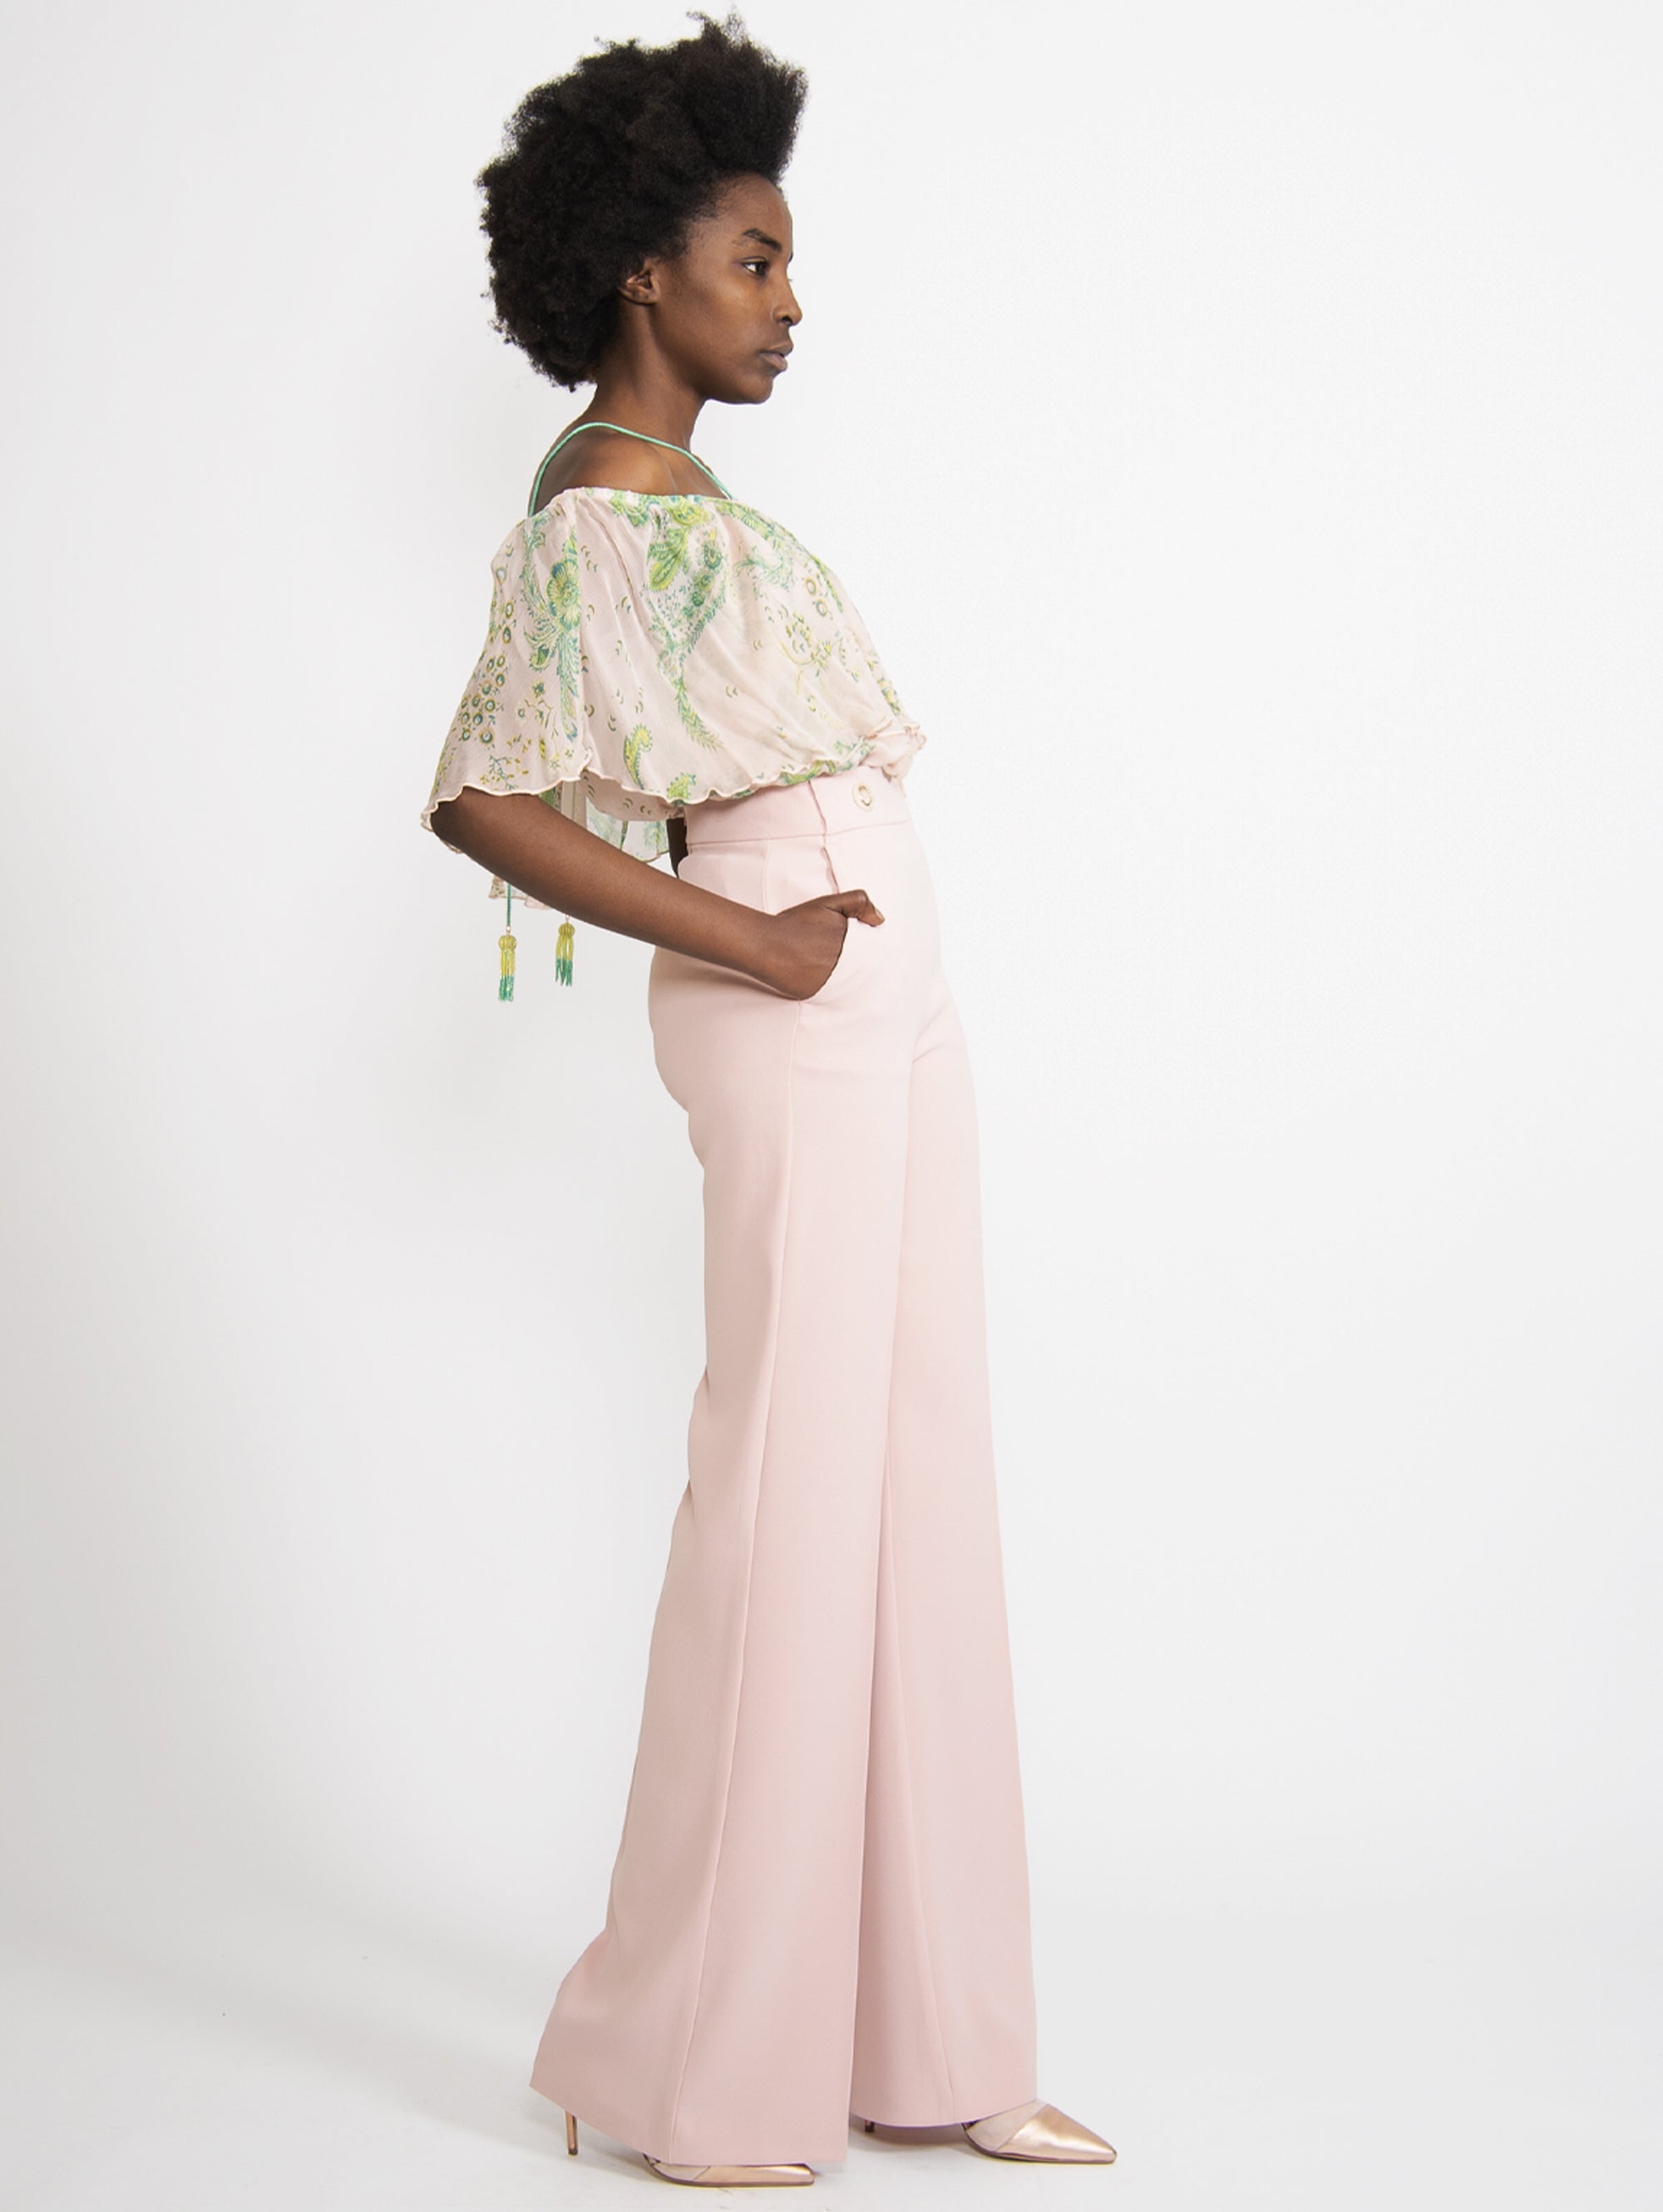 Pink Flare Trousers